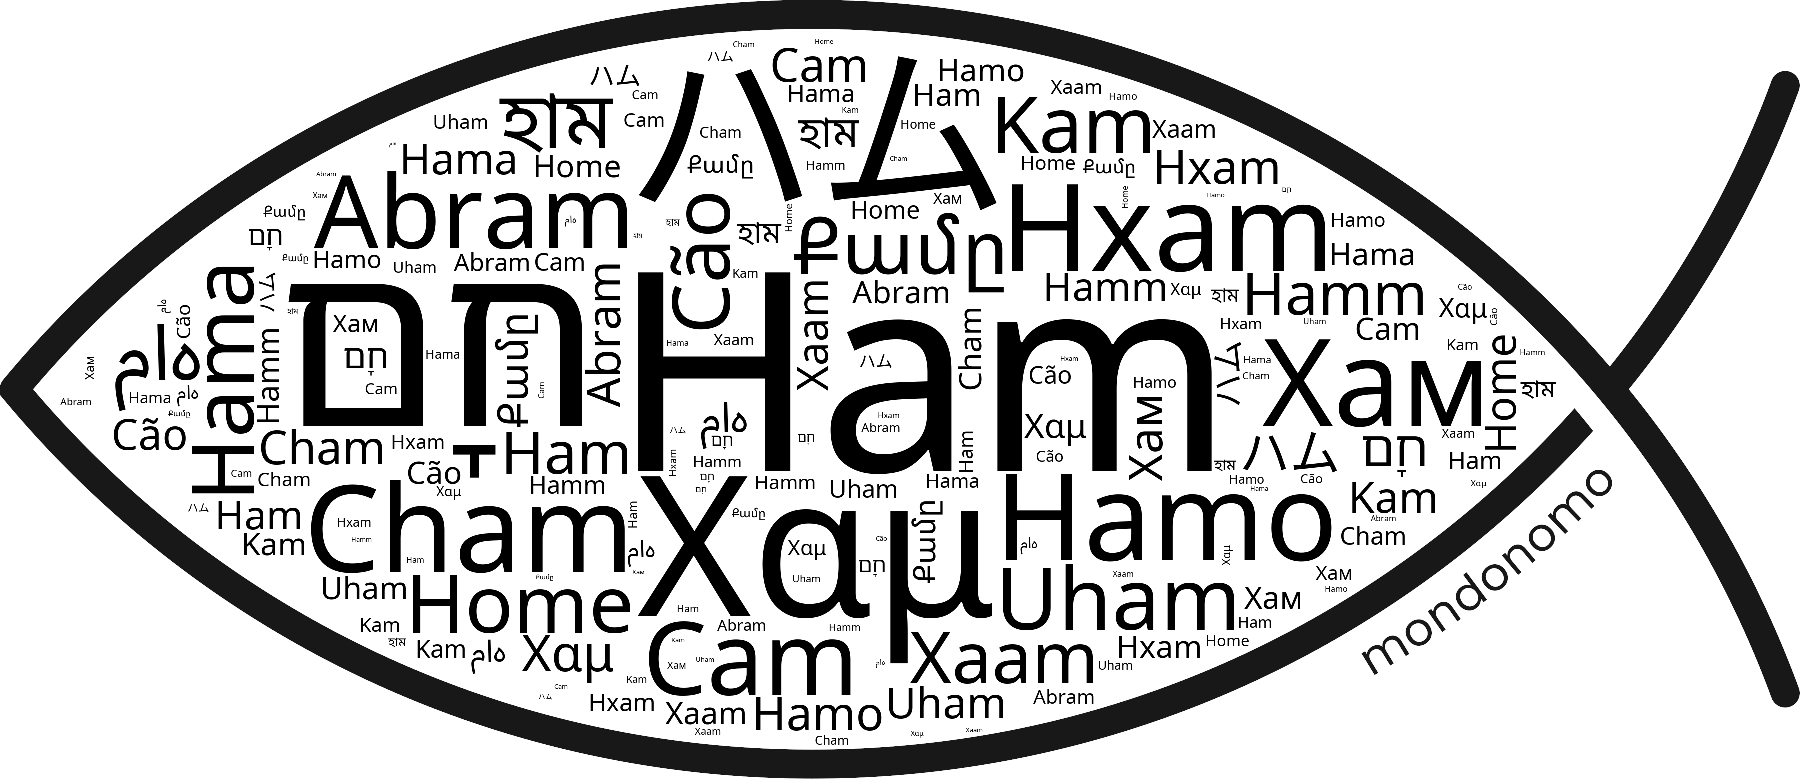 Name Ham in the world's Bibles